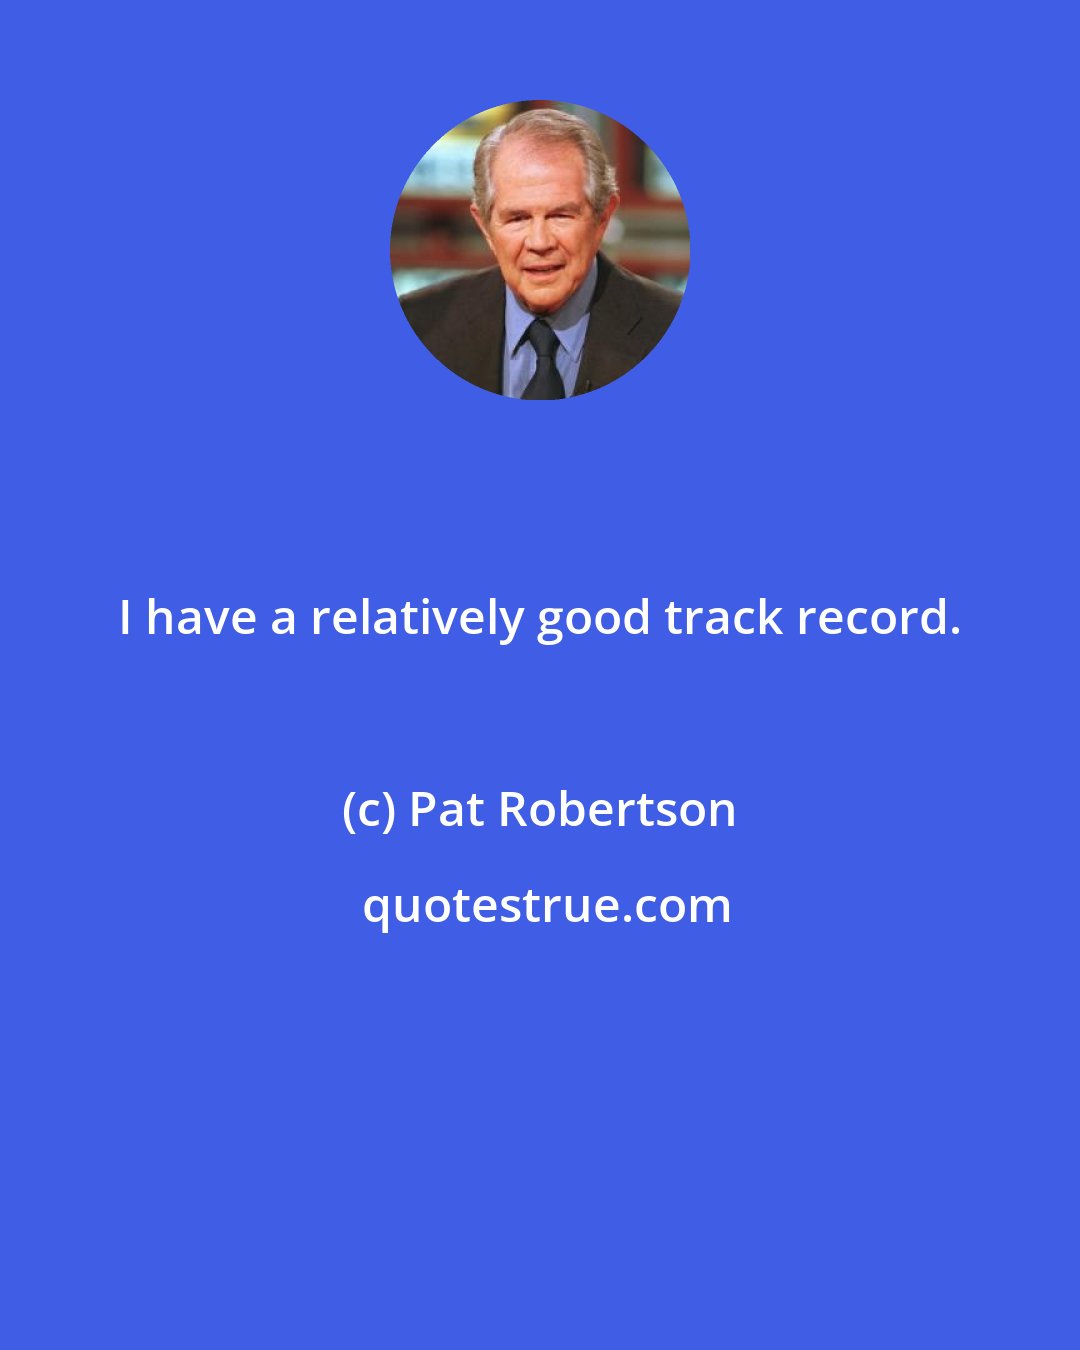 Pat Robertson: I have a relatively good track record.